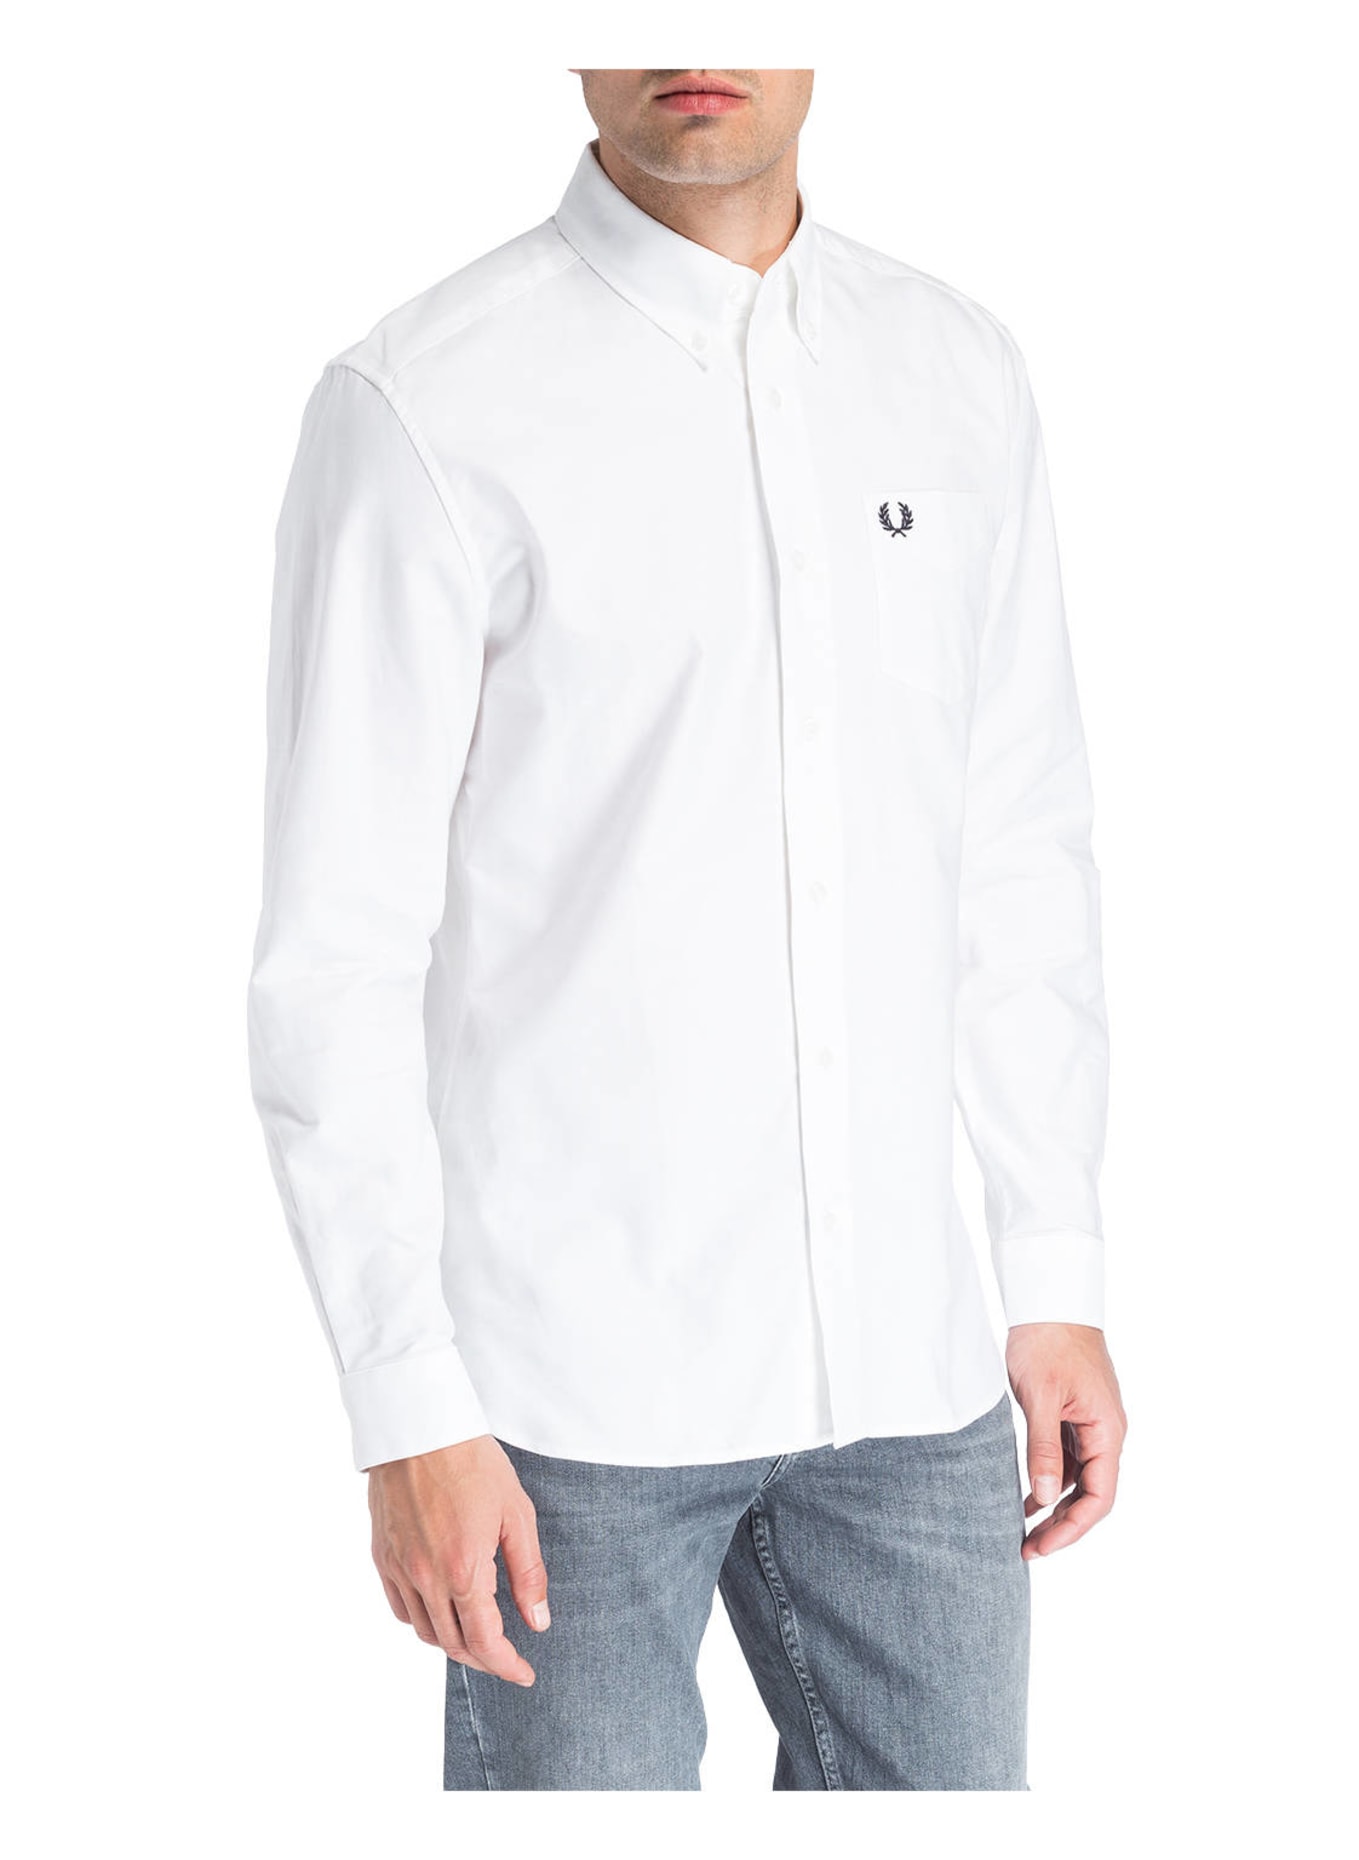 FRED PERRY Hemd Comfort Fit , Farbe: WEISS (Bild 2)